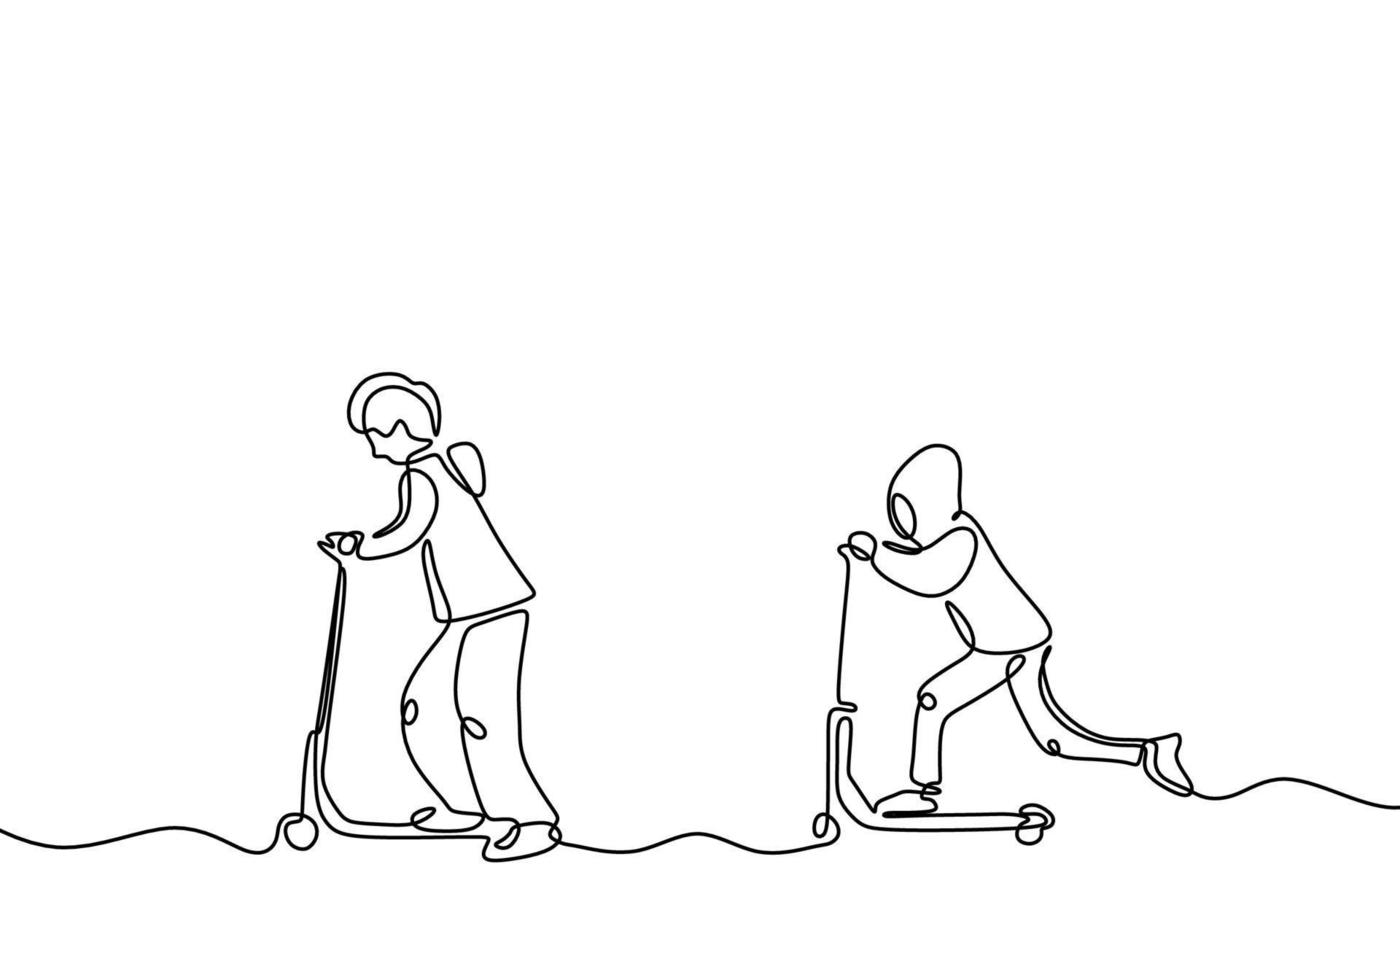 Continuous one line drawing of two kids playing scooter. Friendship and childhood theme of children act of kindness vector